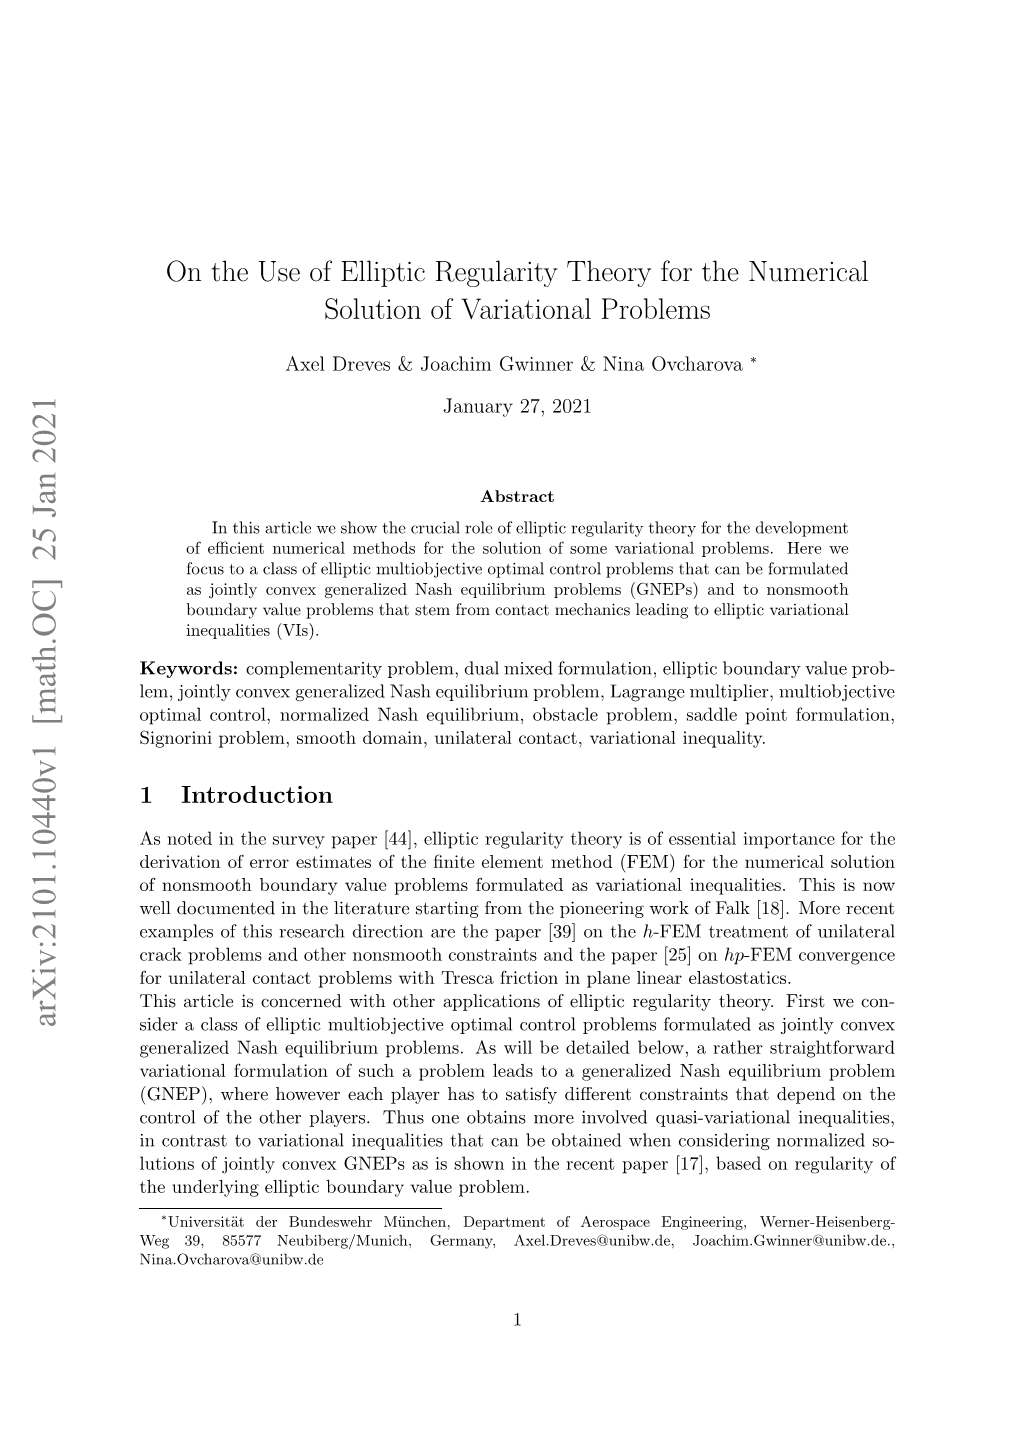 On the Use of Elliptic Regularity Theory for the Numerical Solution Of